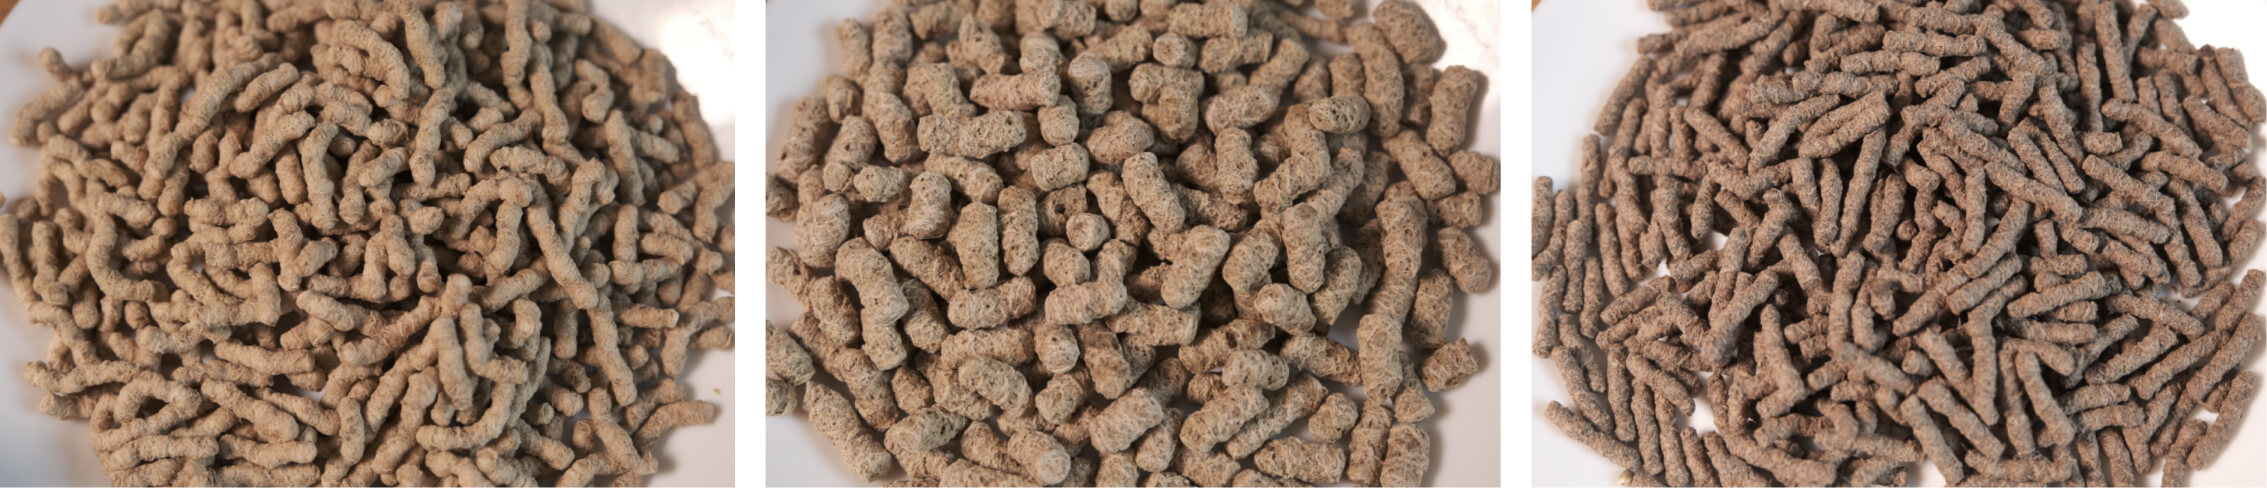 Textured protein granules that can be used for making meat analogues.